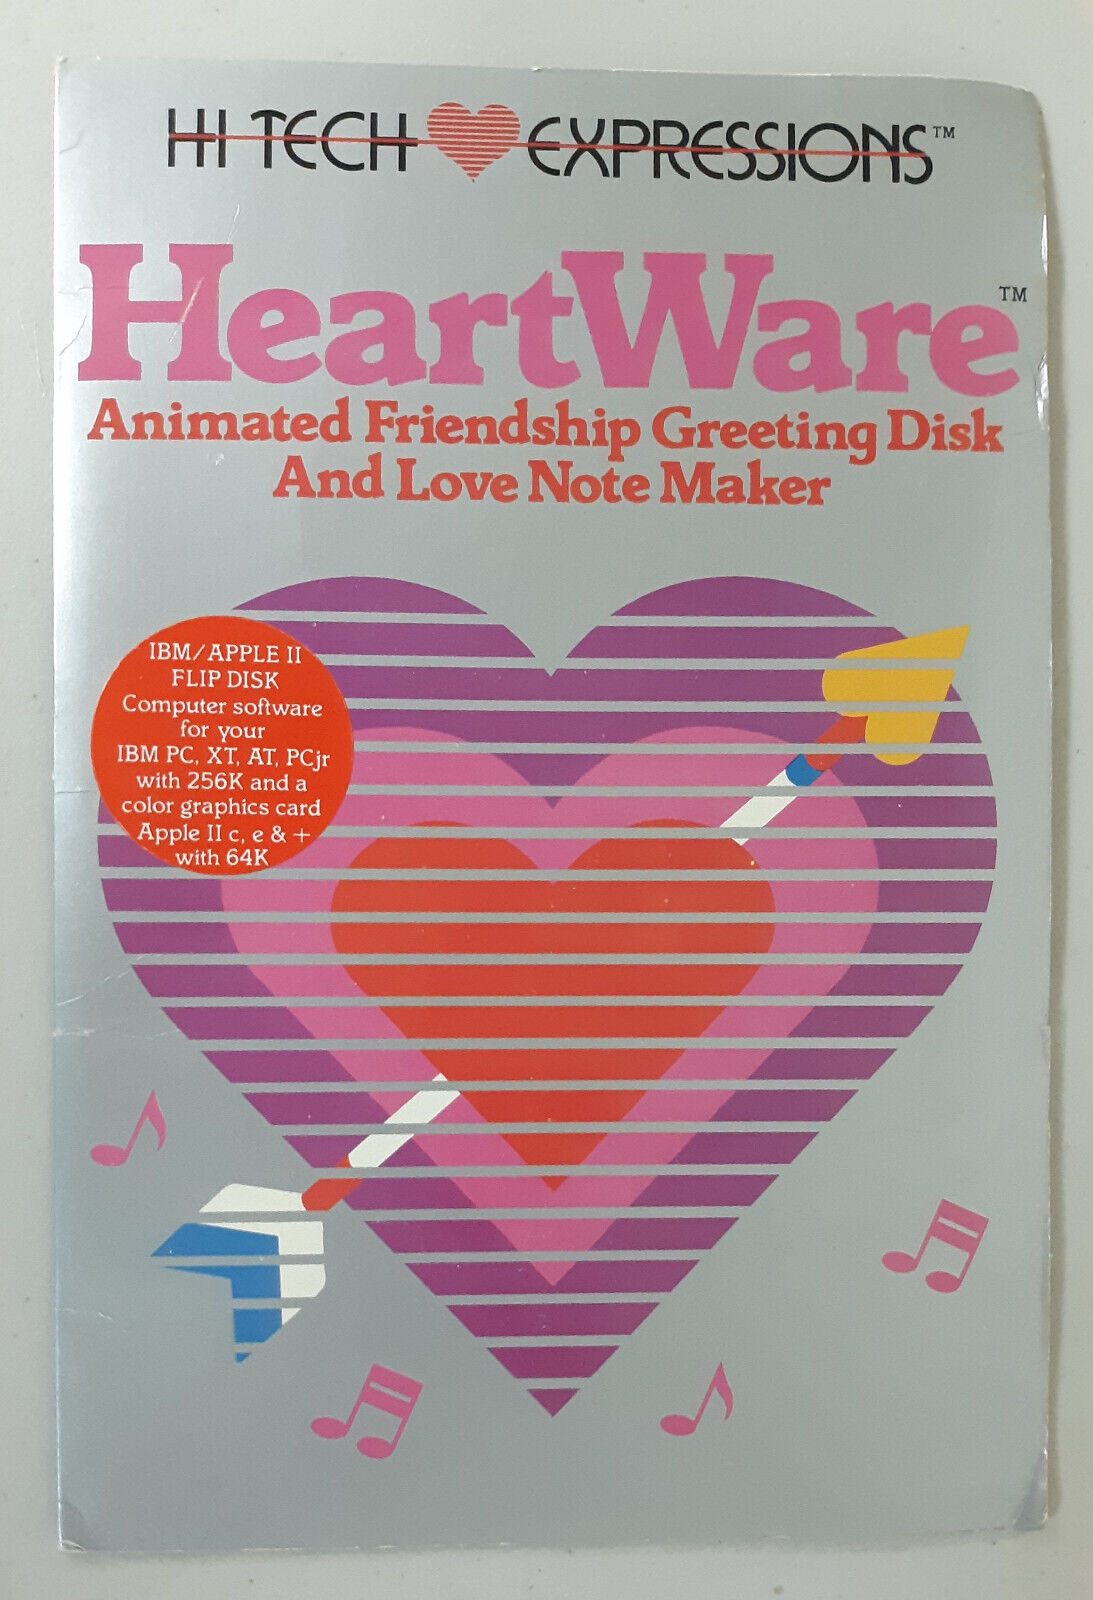 Heartware Note Maker by Hi Tech Expressions for Apple II+,IIe,c,IIgs & IBM 1986